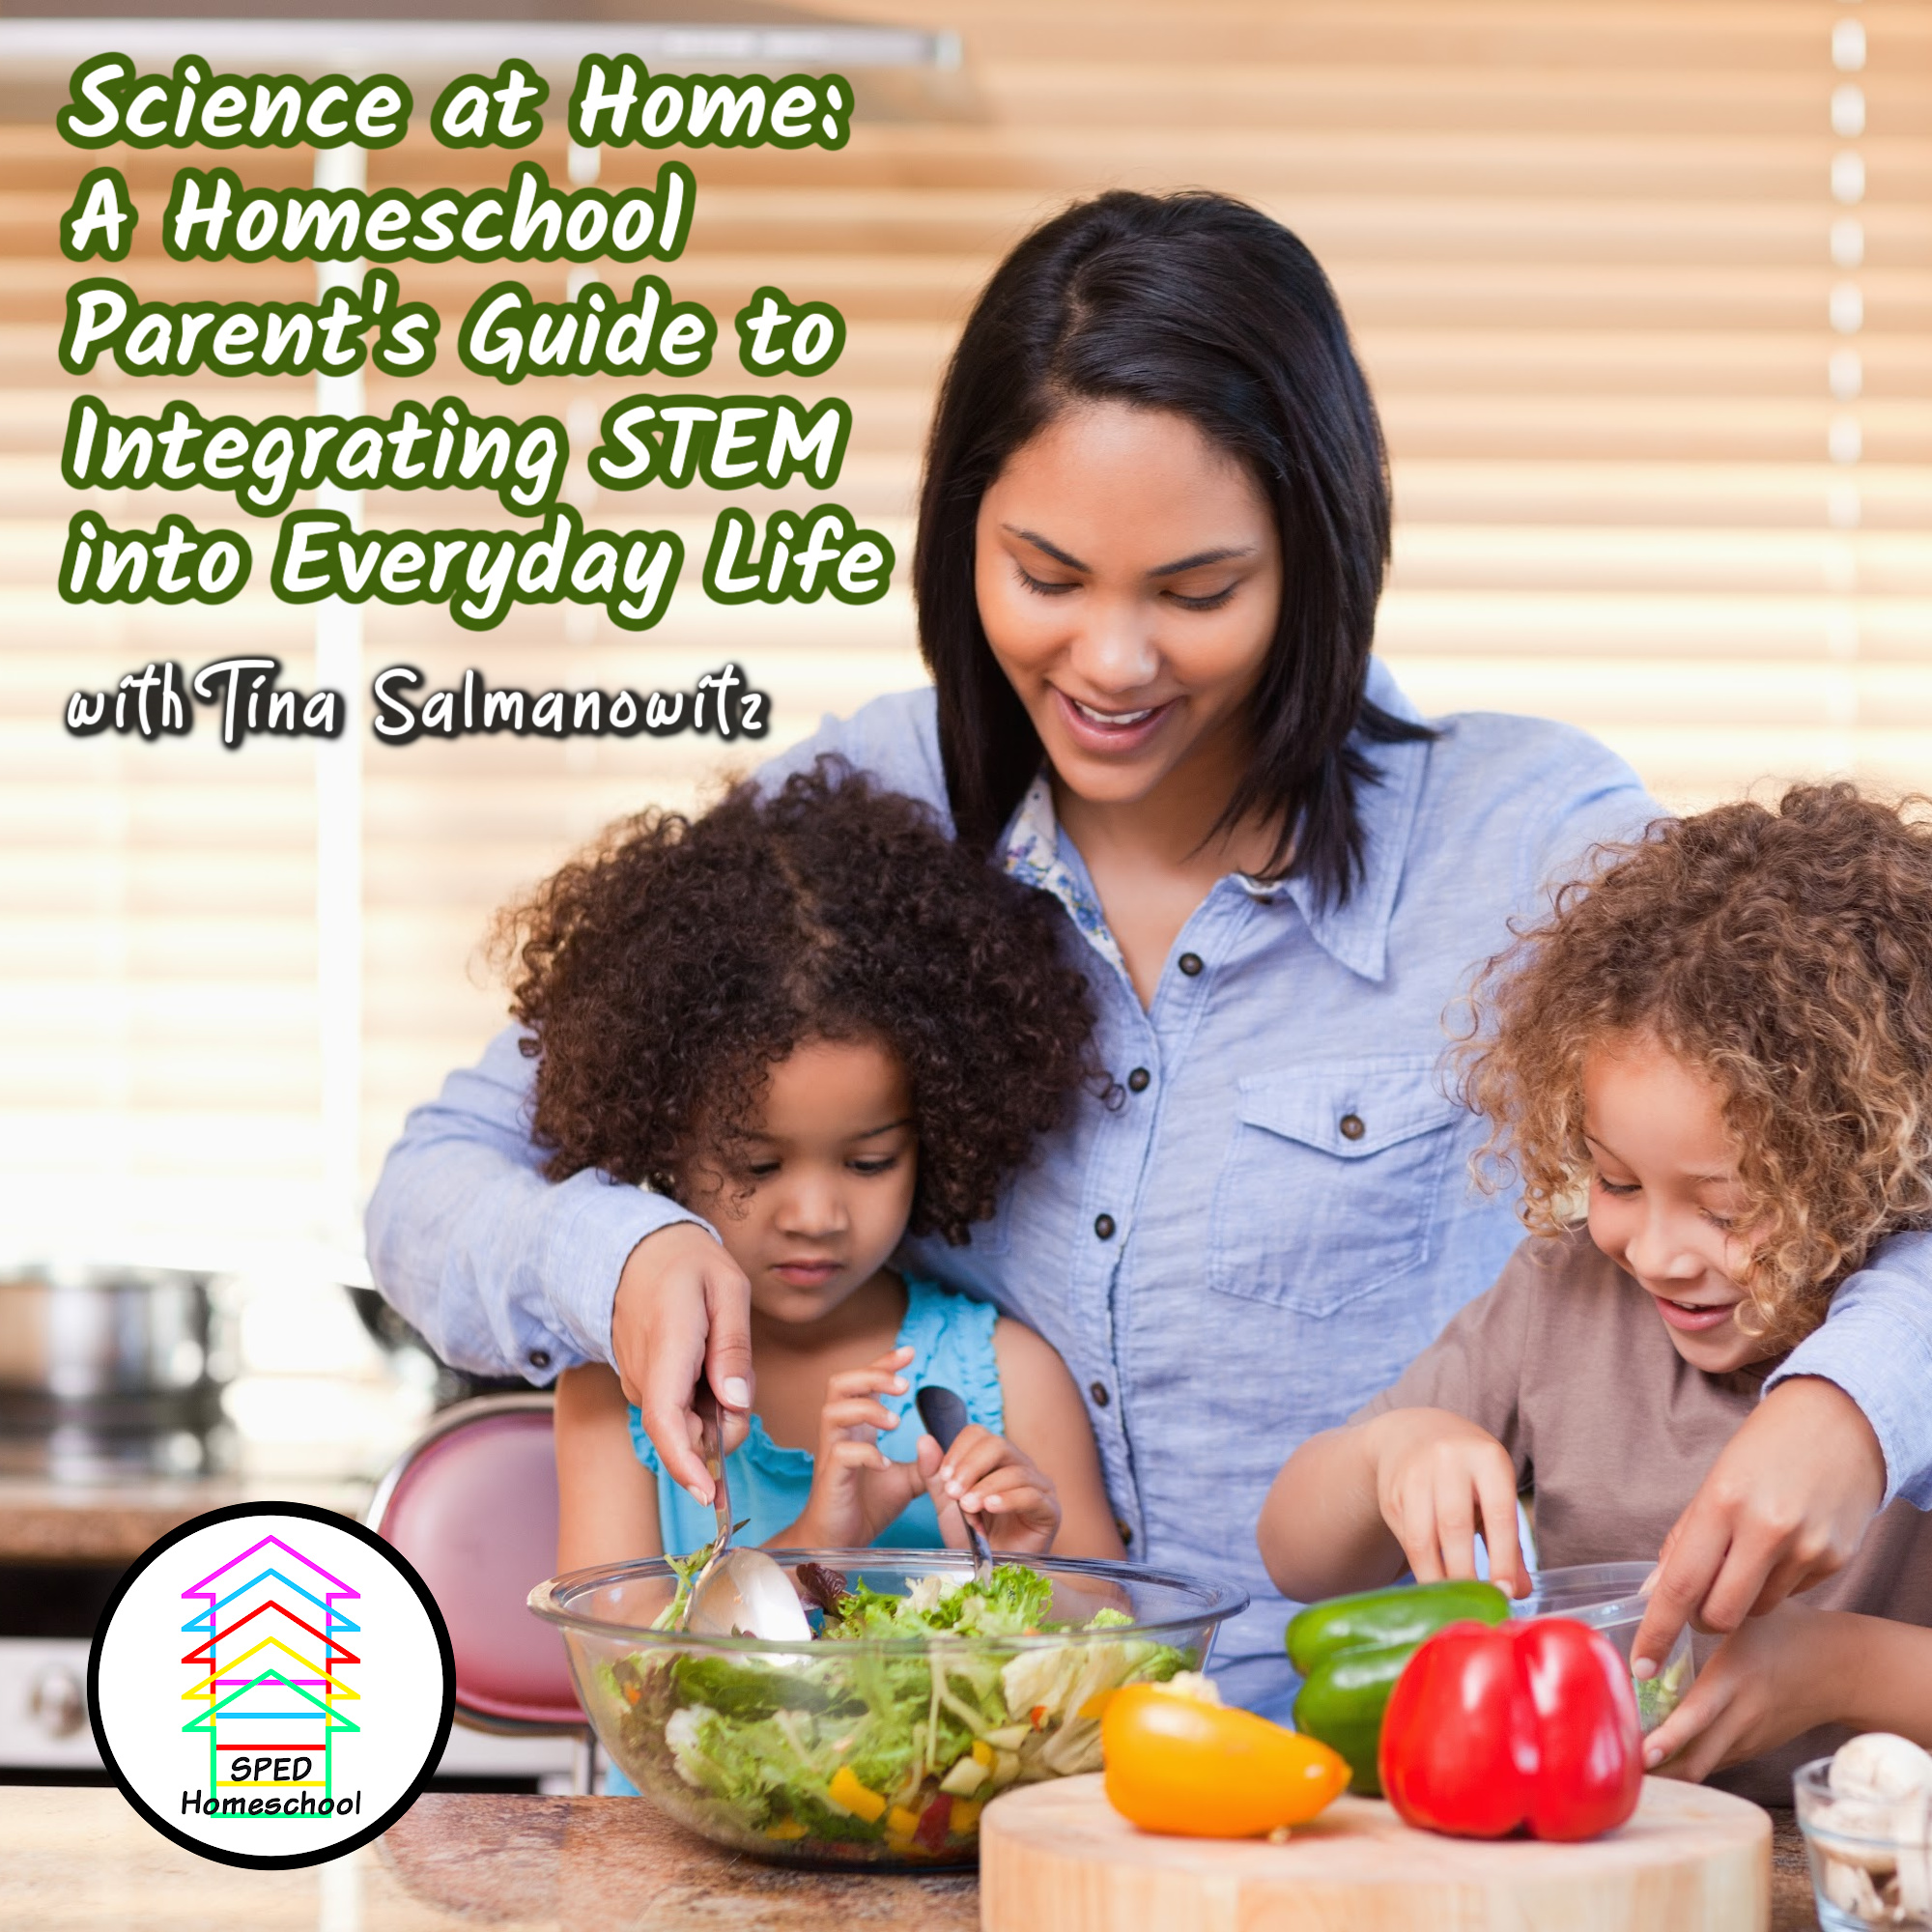 Science at Home: A Homeschool Parent's to Integrating STEM into Everyday Life